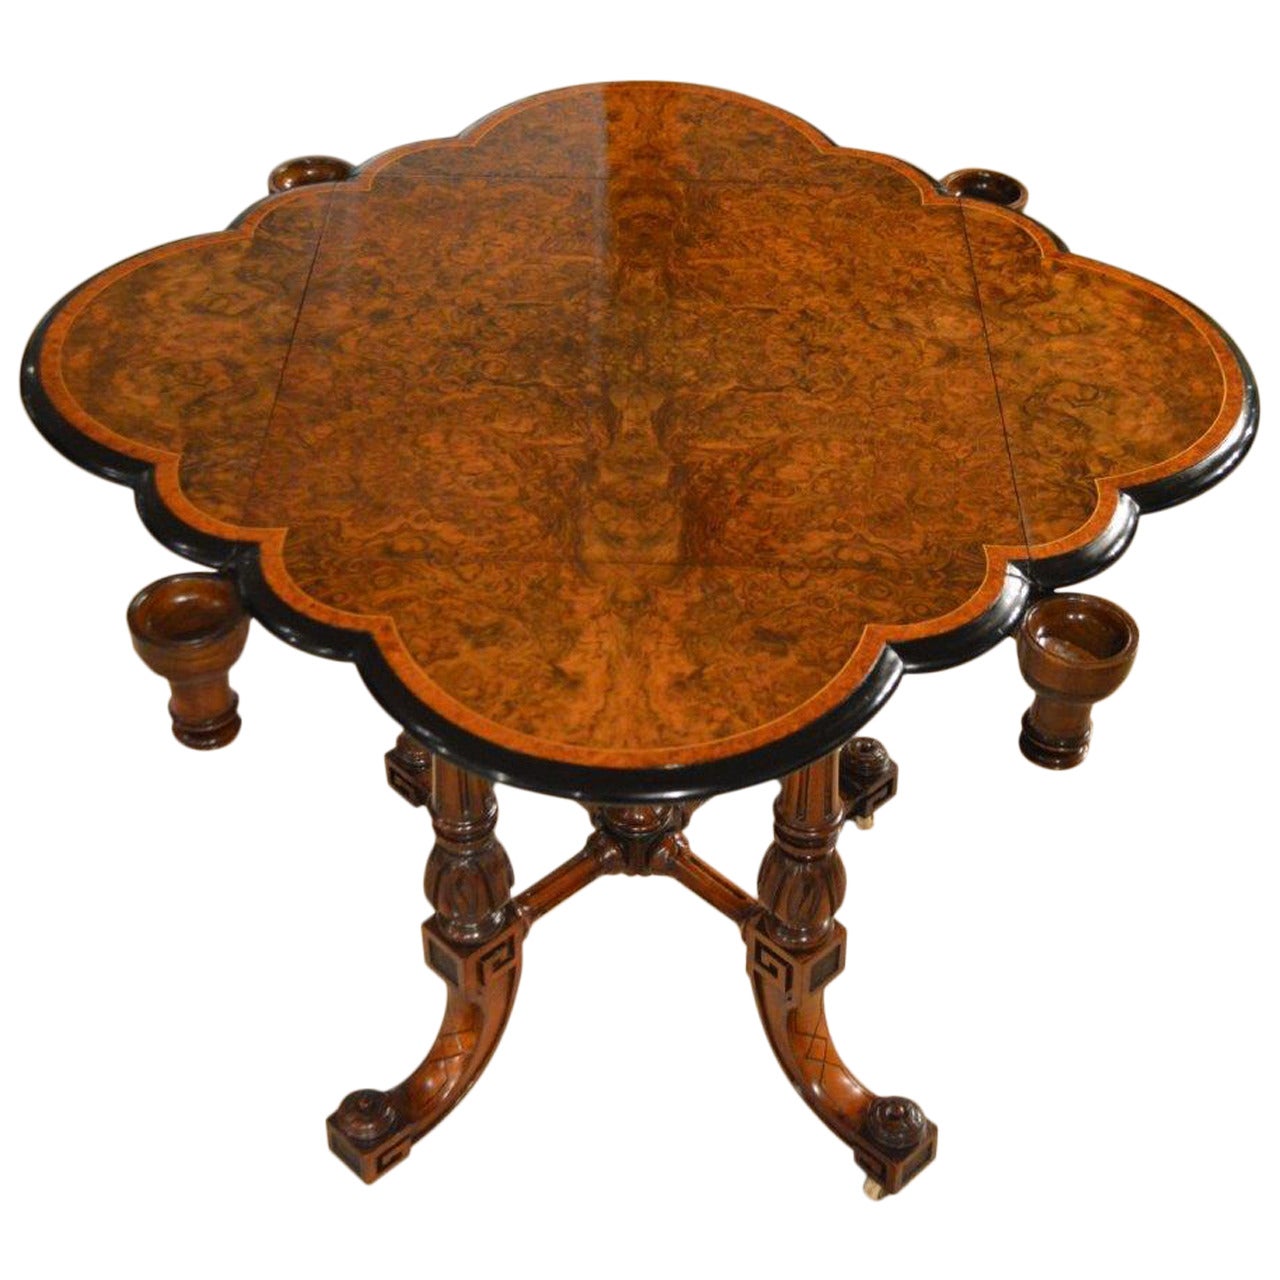 Stunning Quality Burr Walnut and Victorian Period Clover Leaf Games Table